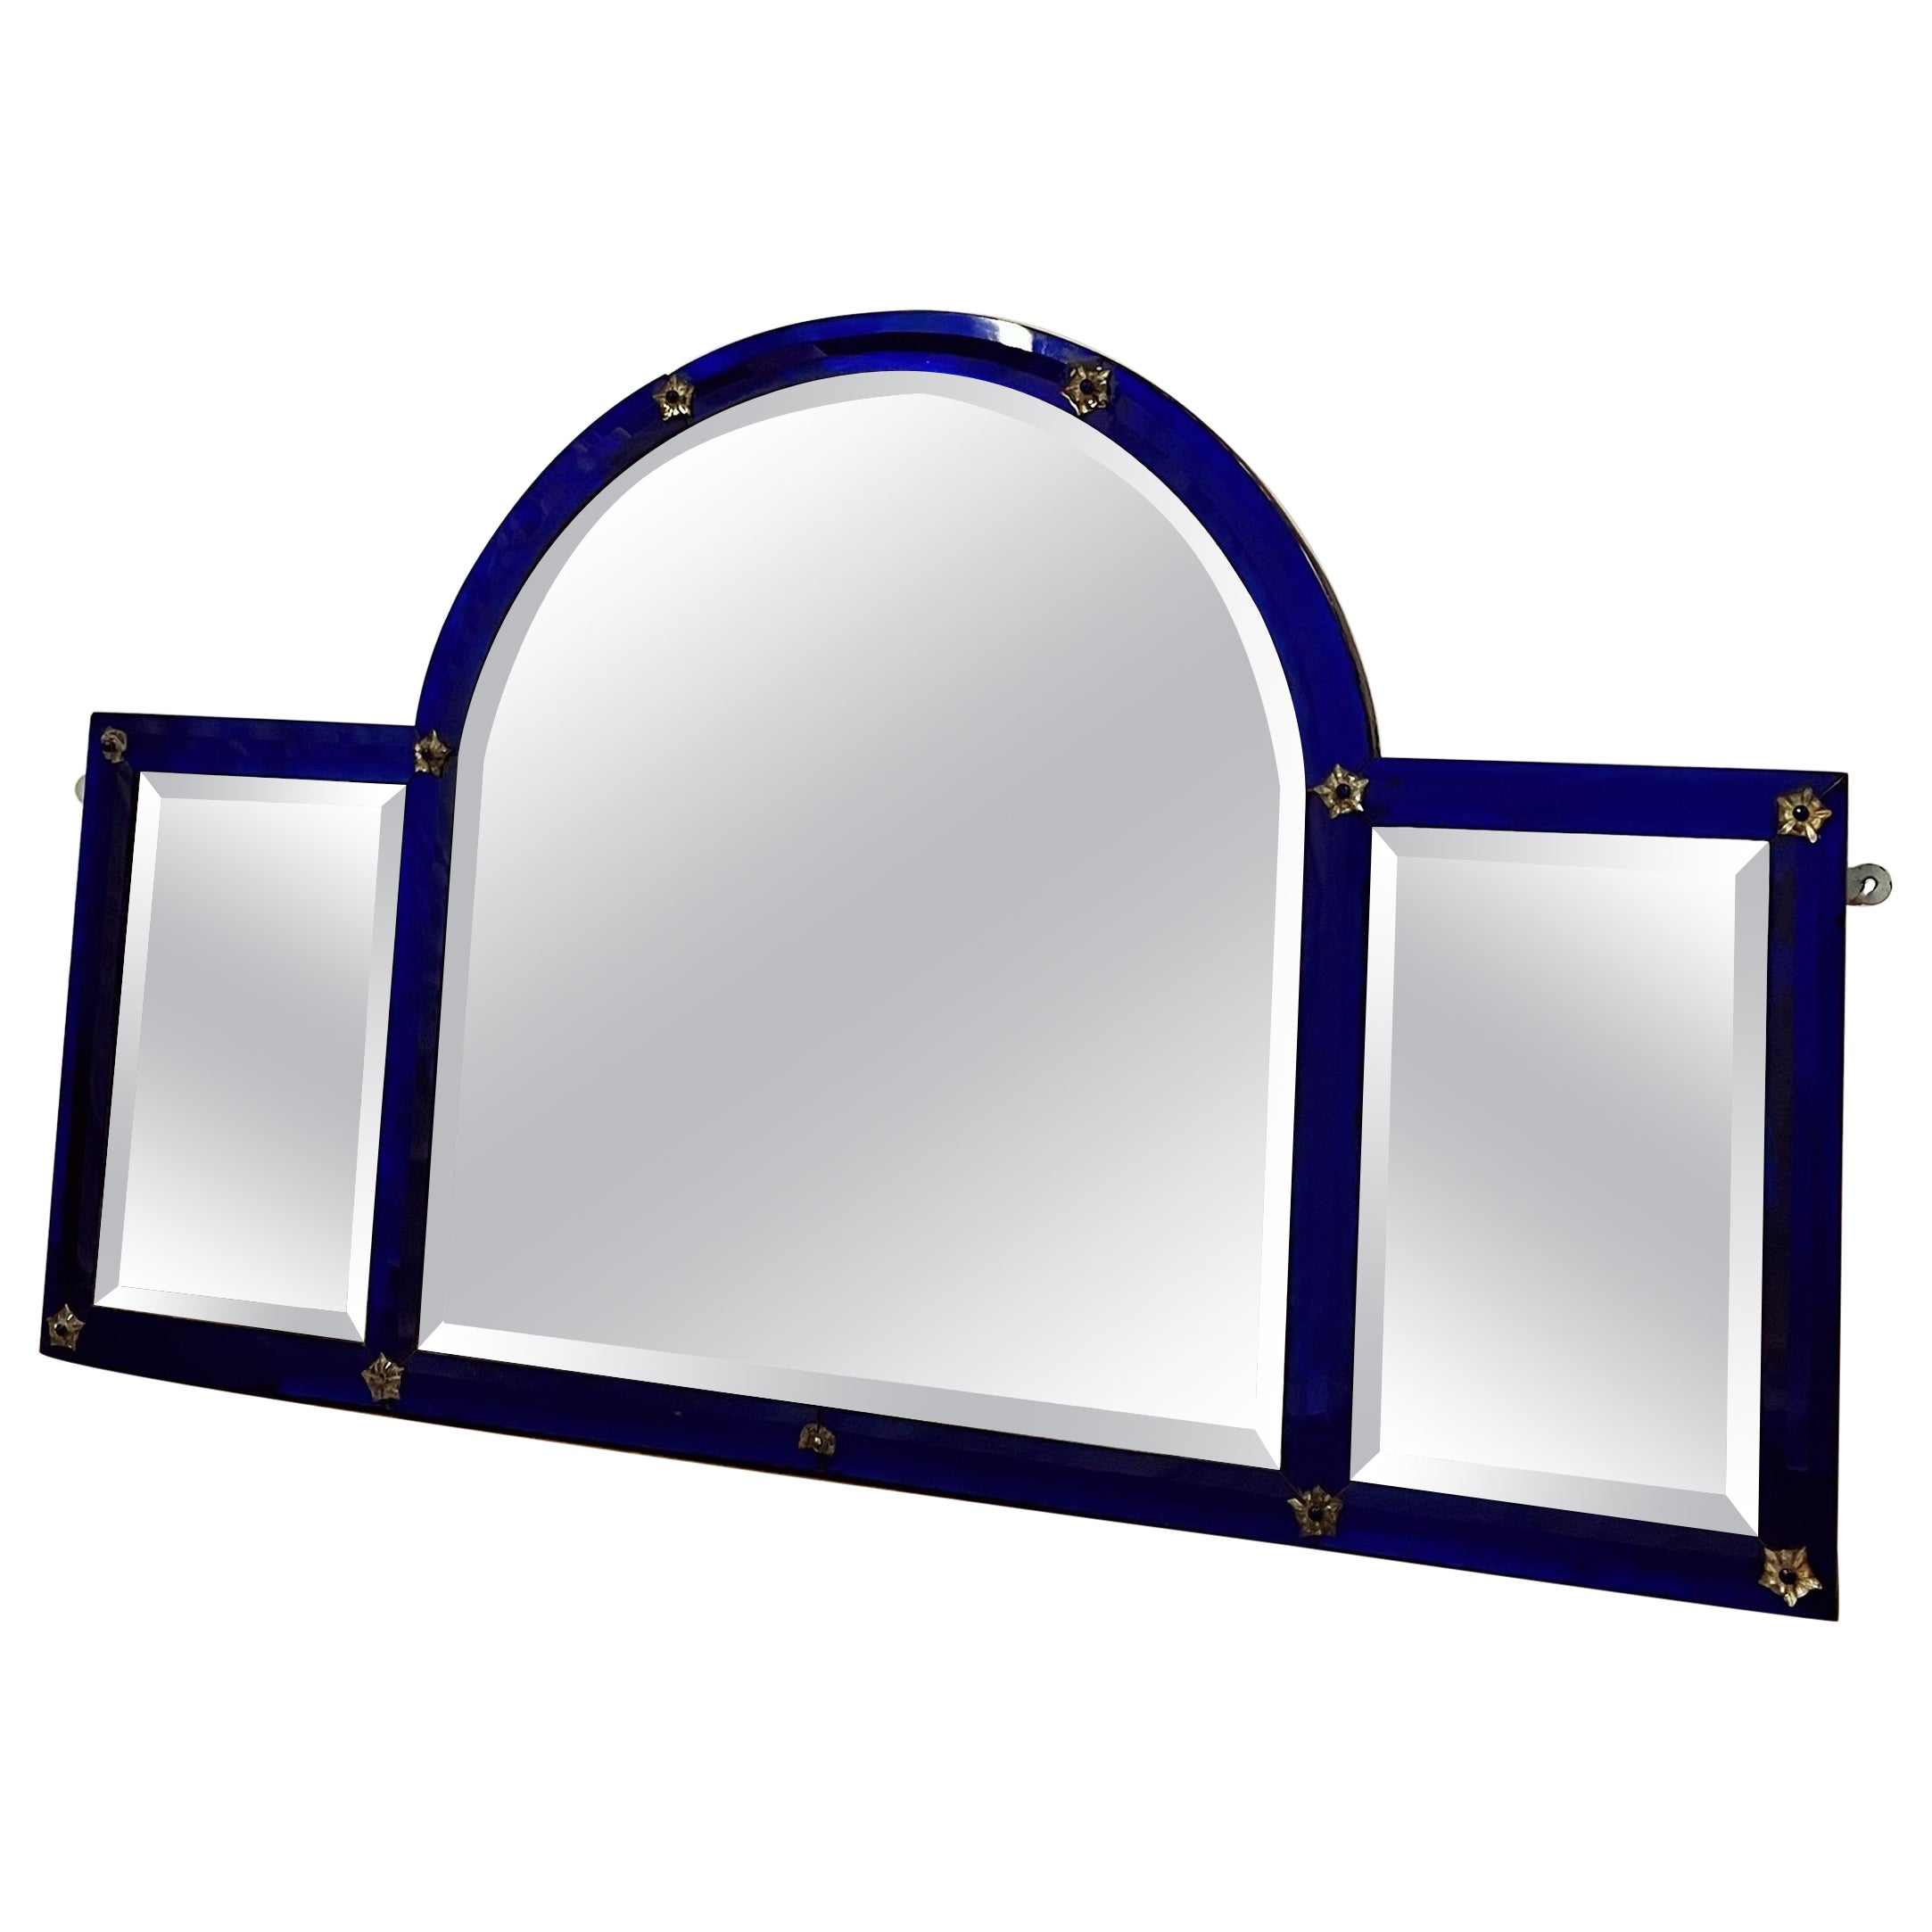 An Early Twentieth Century French Overmantel Mirror  For Sale